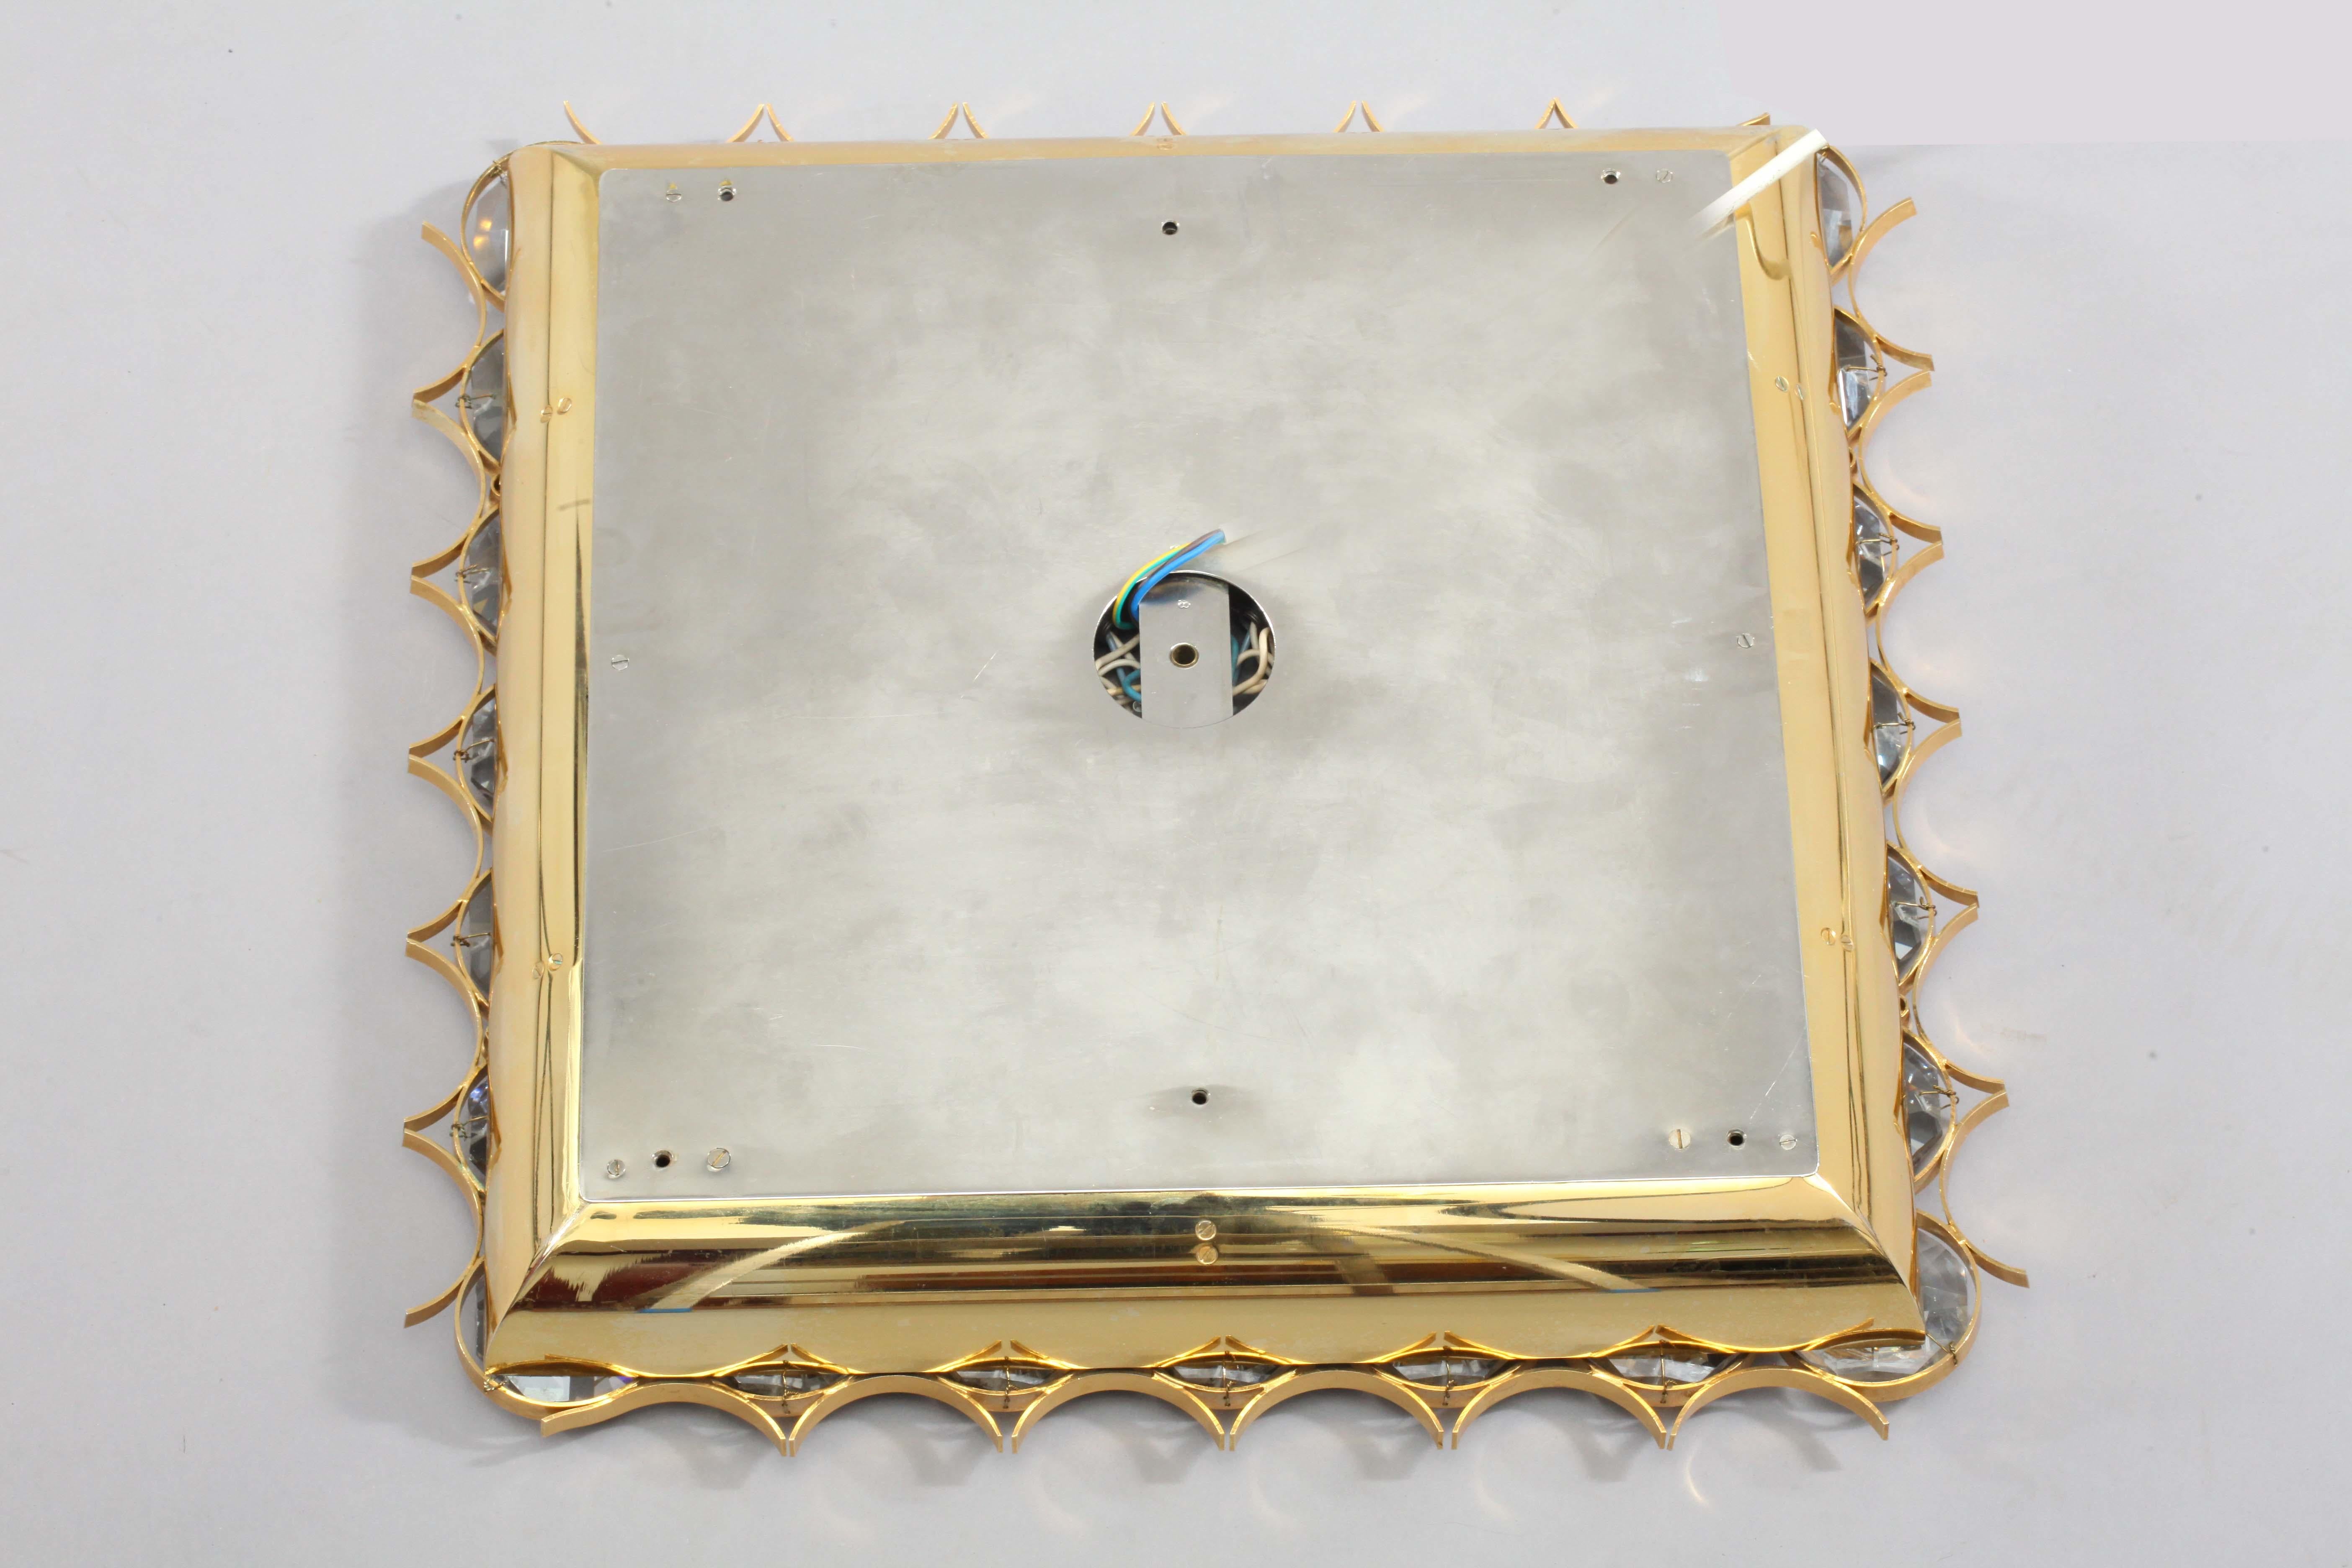 Illuminated Square Crystall Wall Mirror Designed, Ernst Palme by Palwa, Germany (Deutsch)